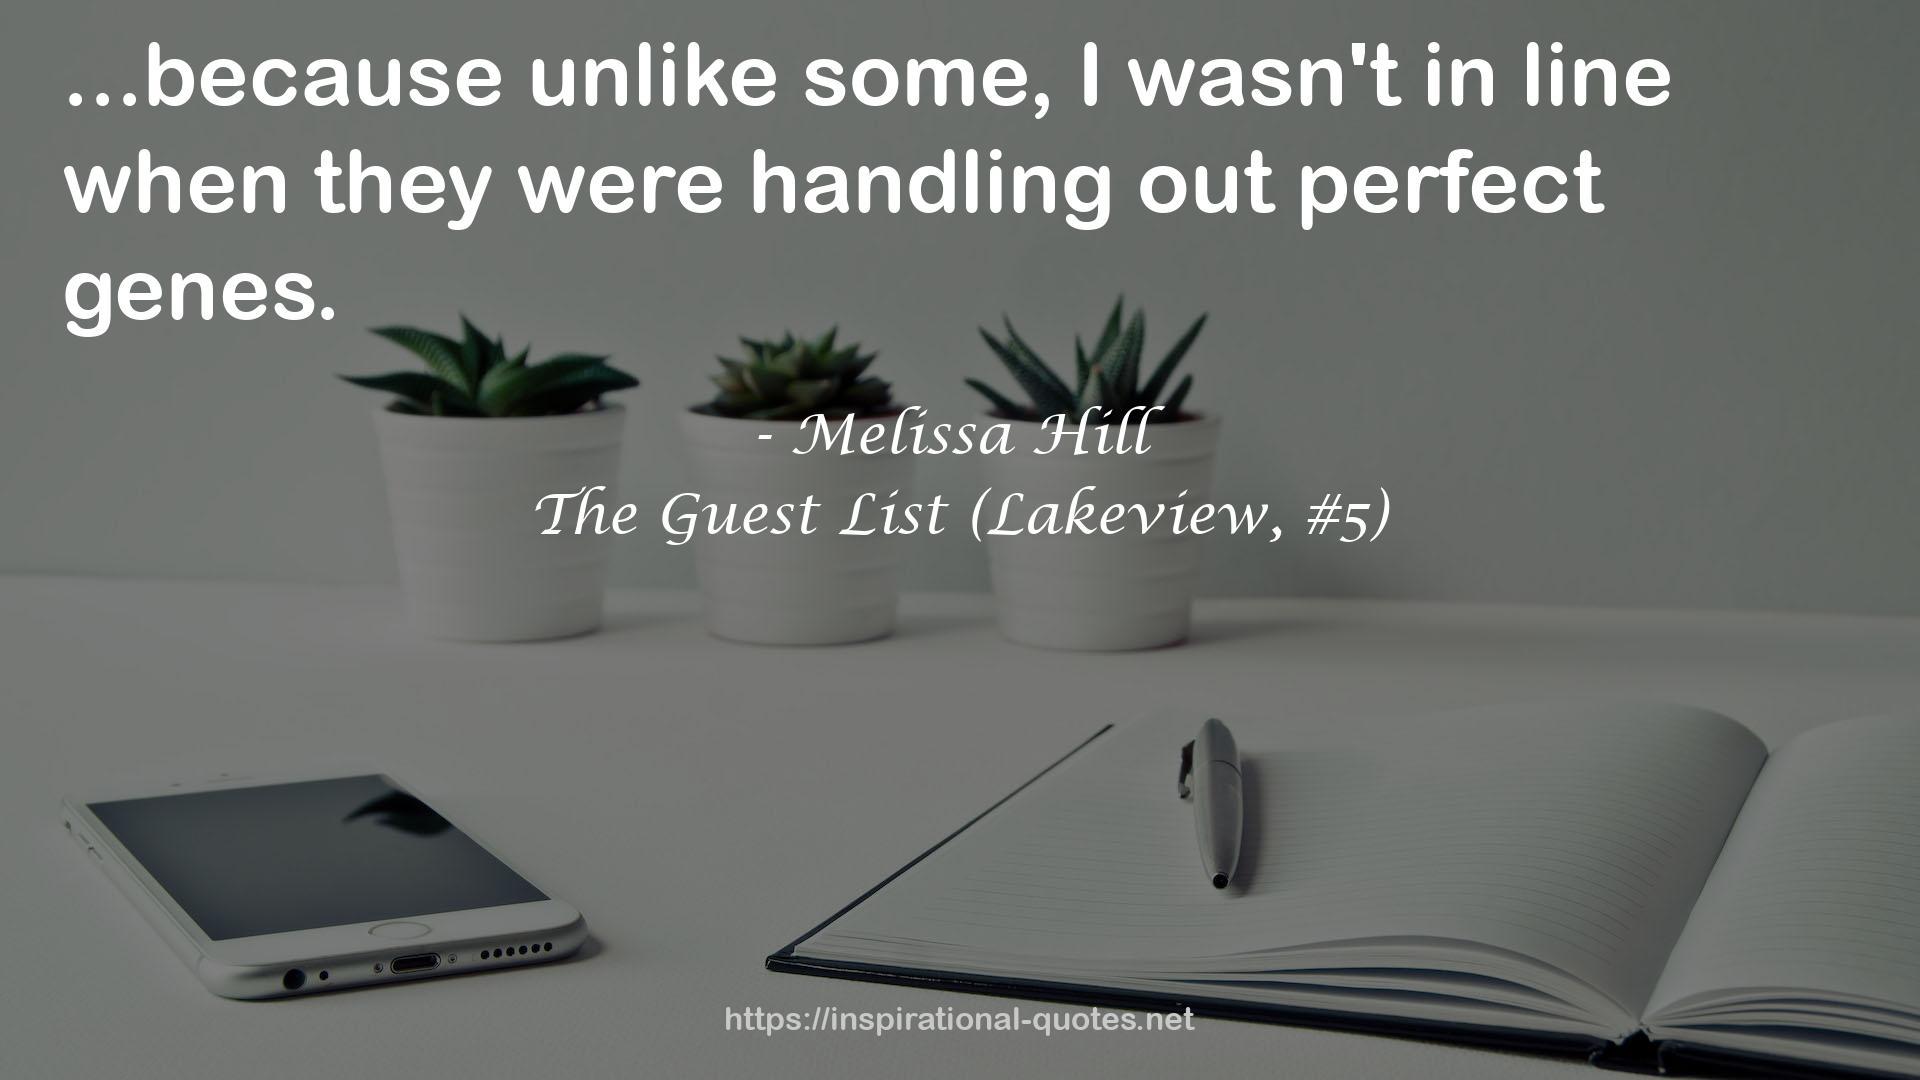 The Guest List (Lakeview, #5) QUOTES